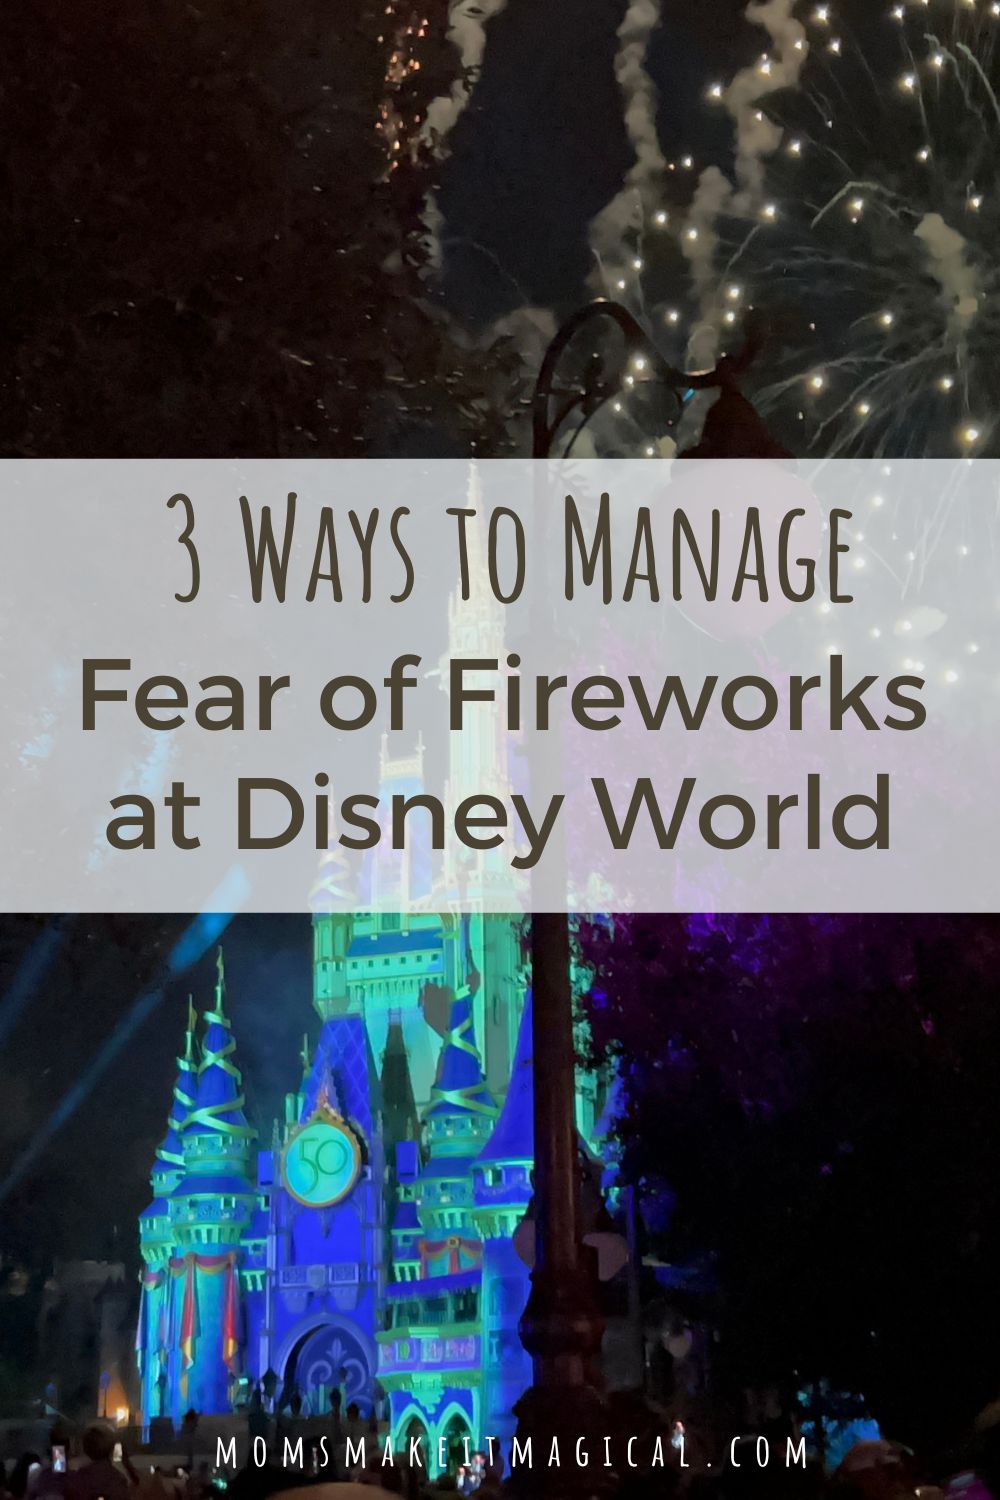 3 Ways to Manage Fear of Fireworks at Disney World